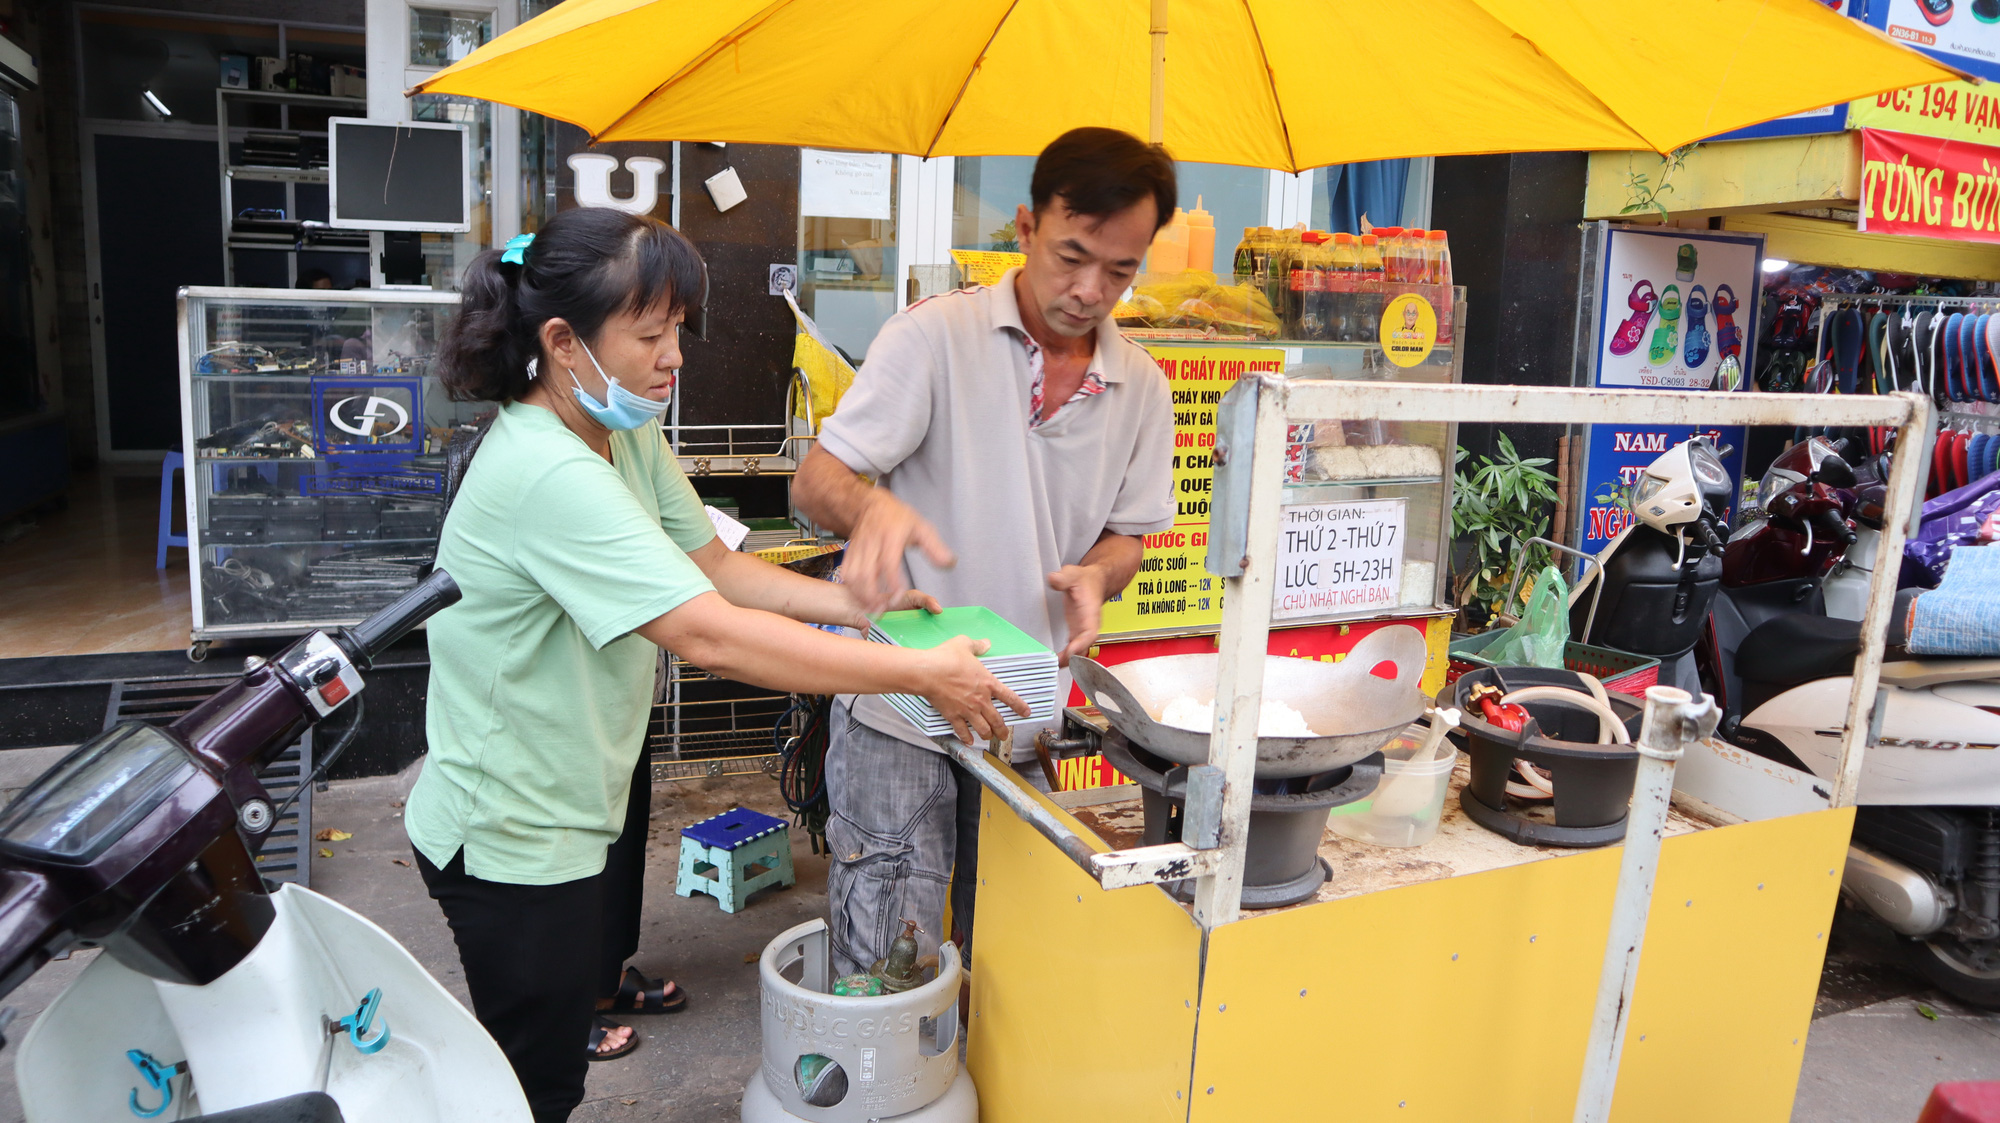 Deaf-mute couple runs street food stall in Saigon with smiles, sign language